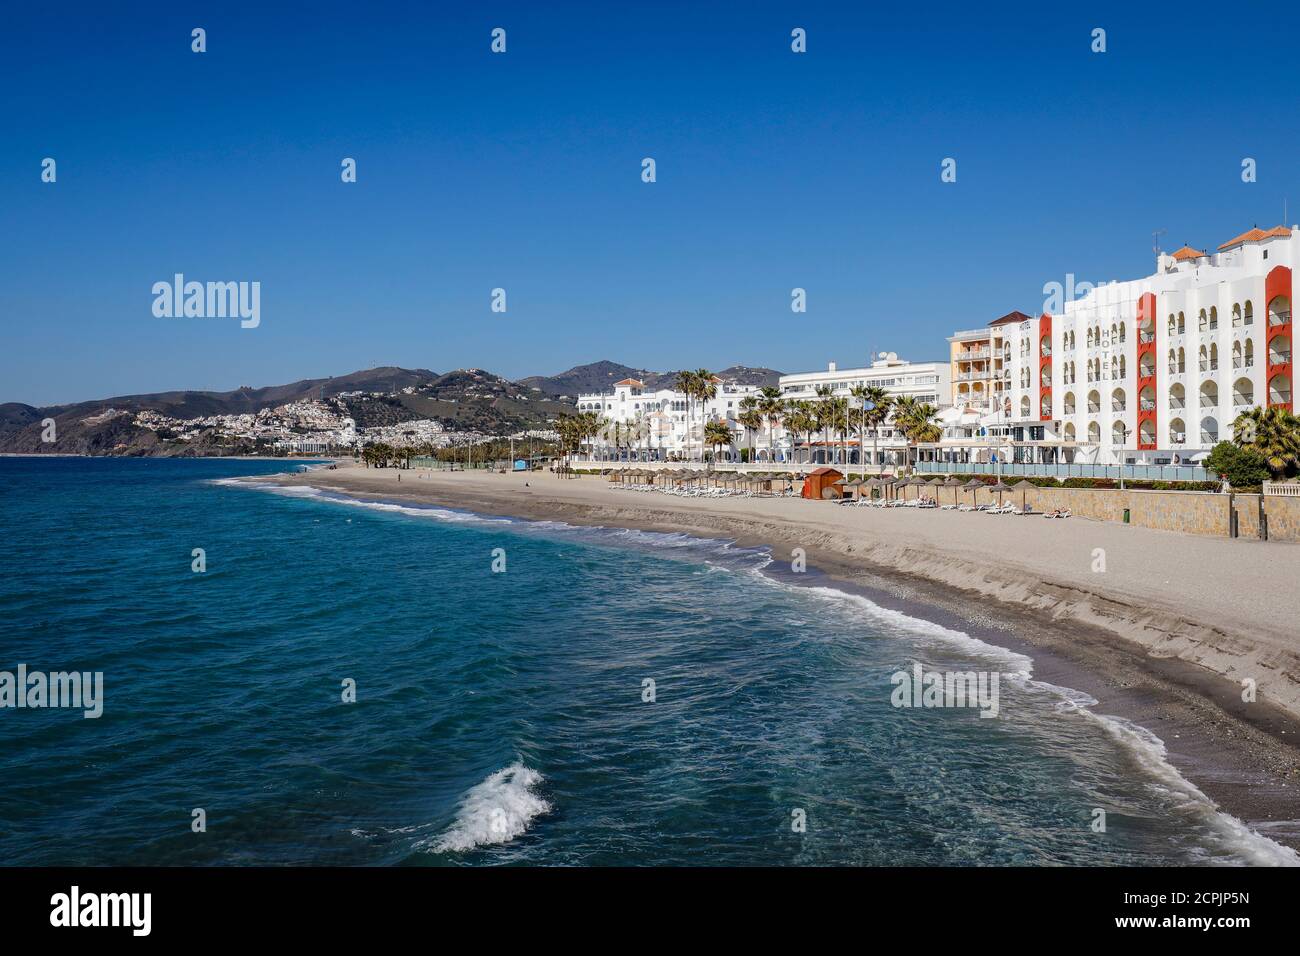 Urban beach in the resort town of Nerja, Malaga Province, Costa del Sol, Andalusia, Spain Stock Photo